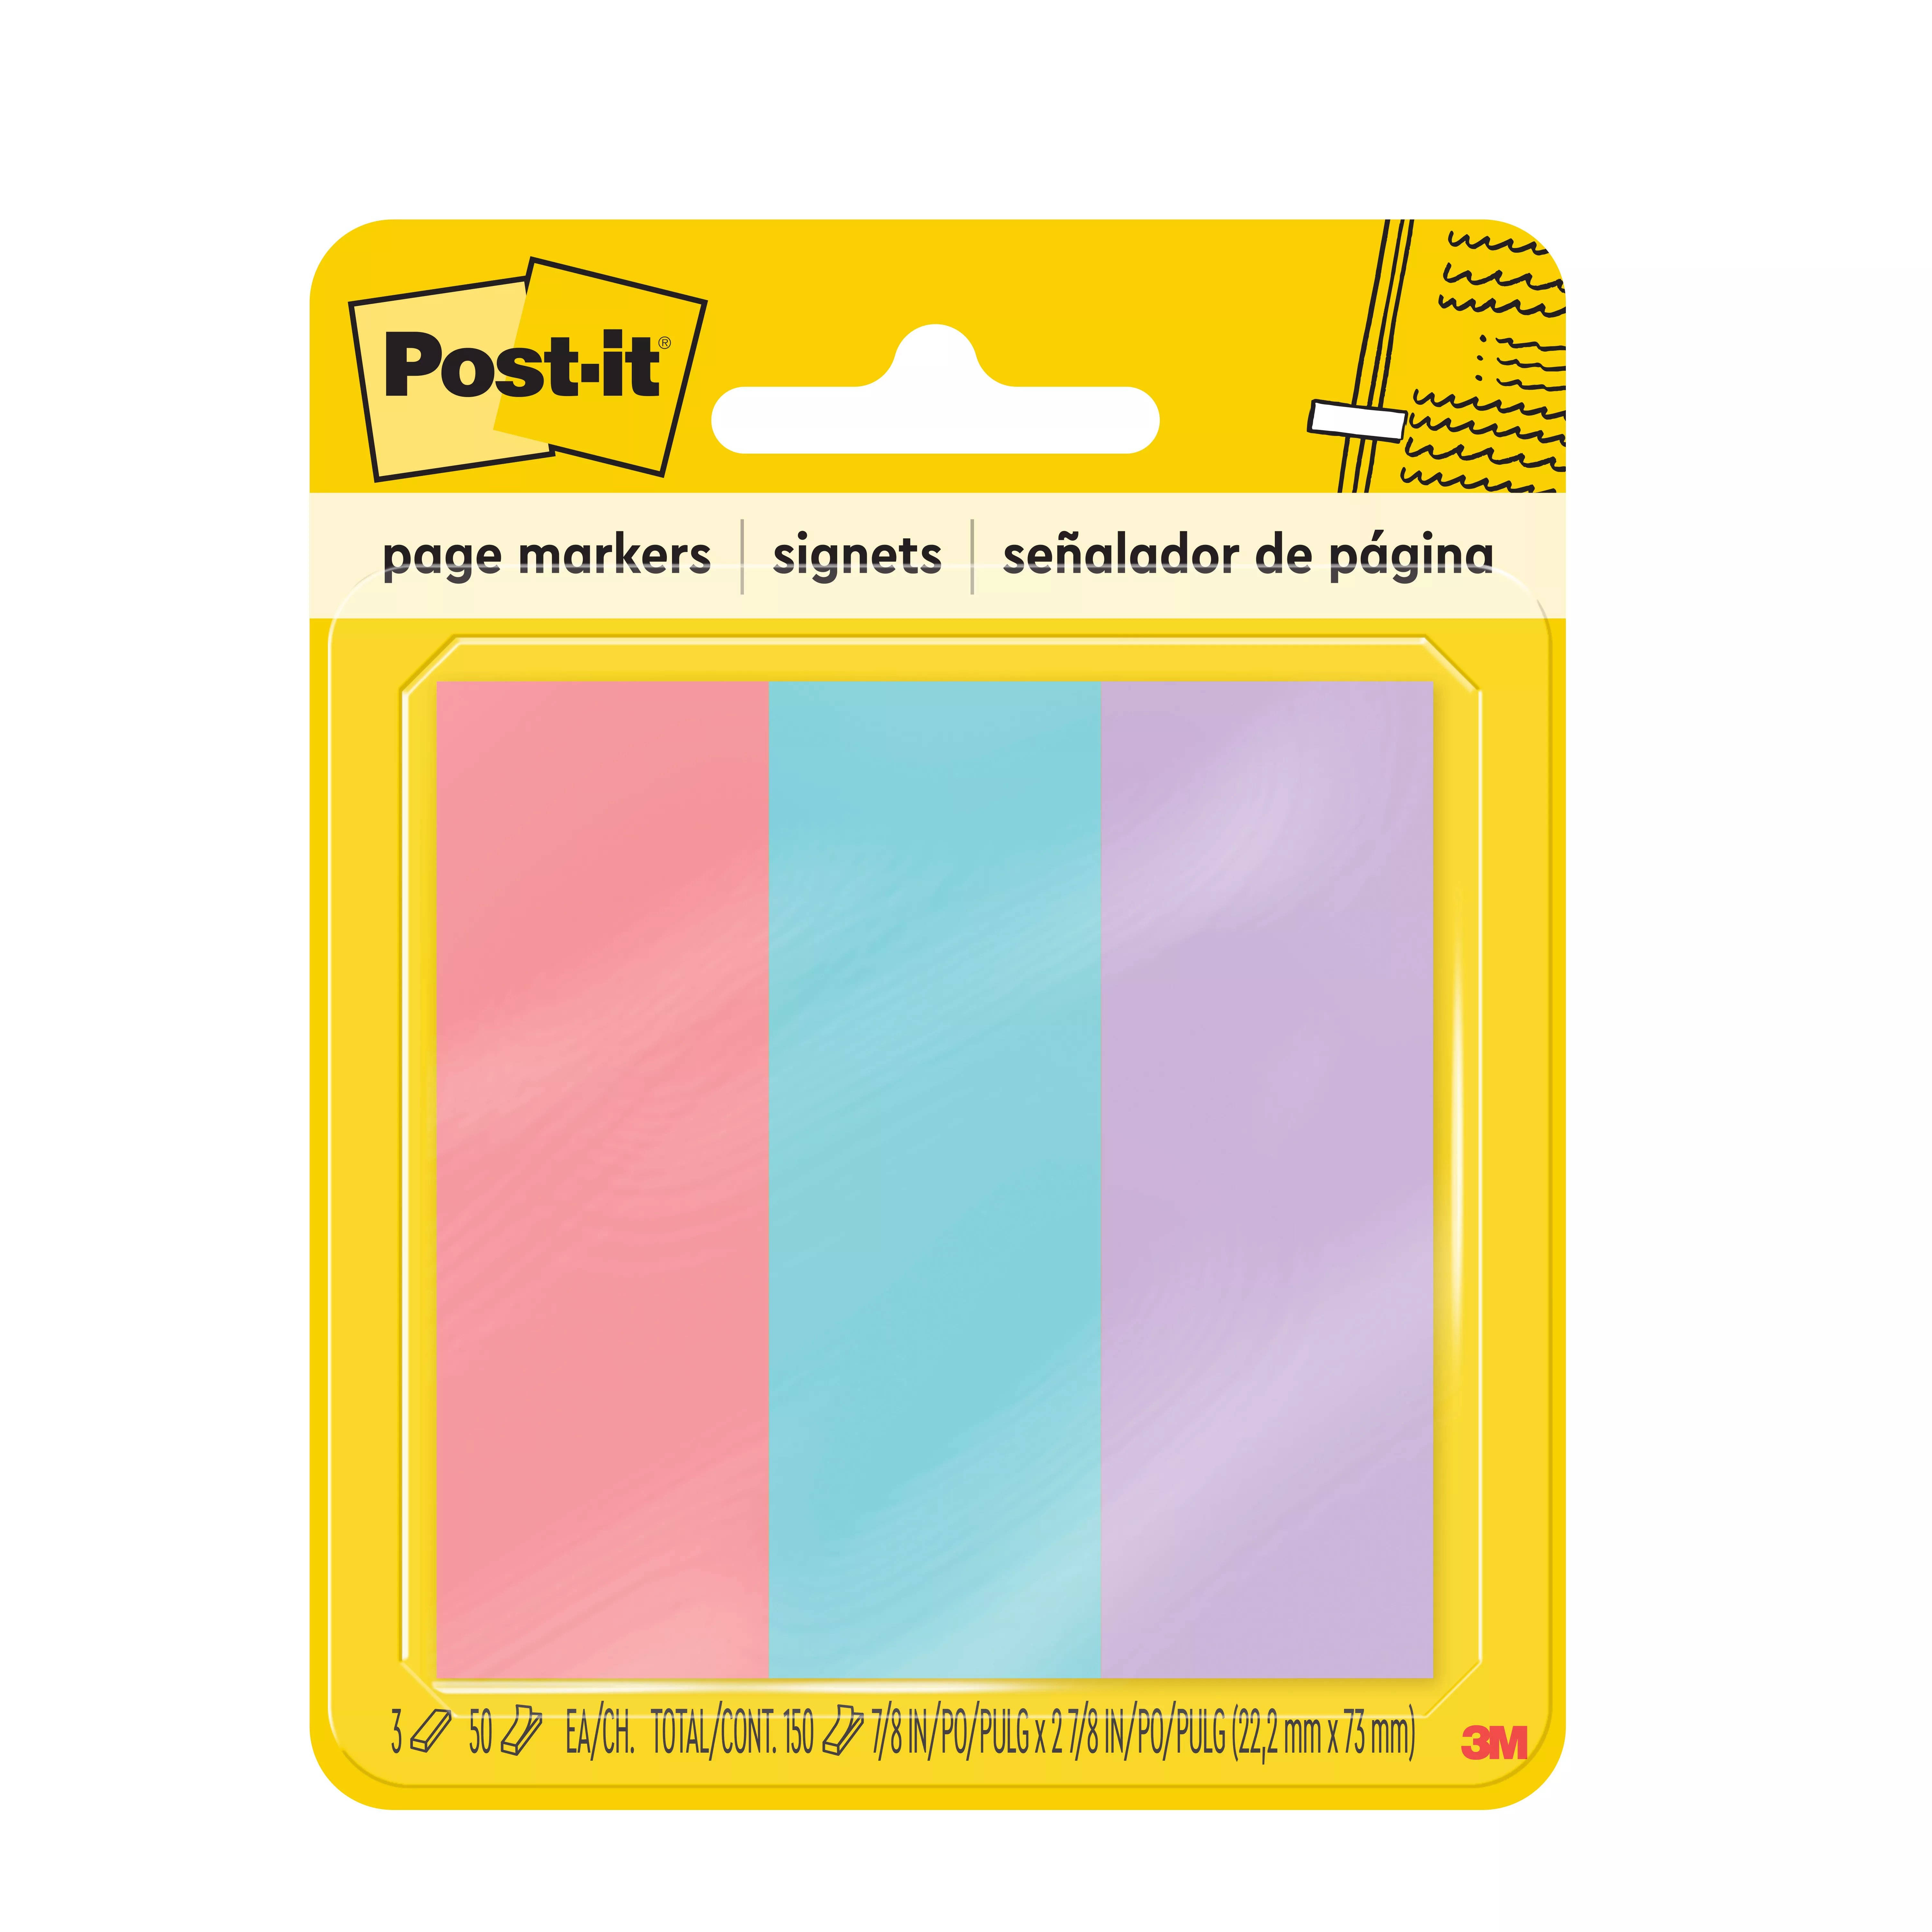 Post-it® Page Markers 5222, 1 in x 3 in x in (22,2 mm x 73 mm), Assorted
Colors, 3 Pads/Pack, 50 Sheets/Pad